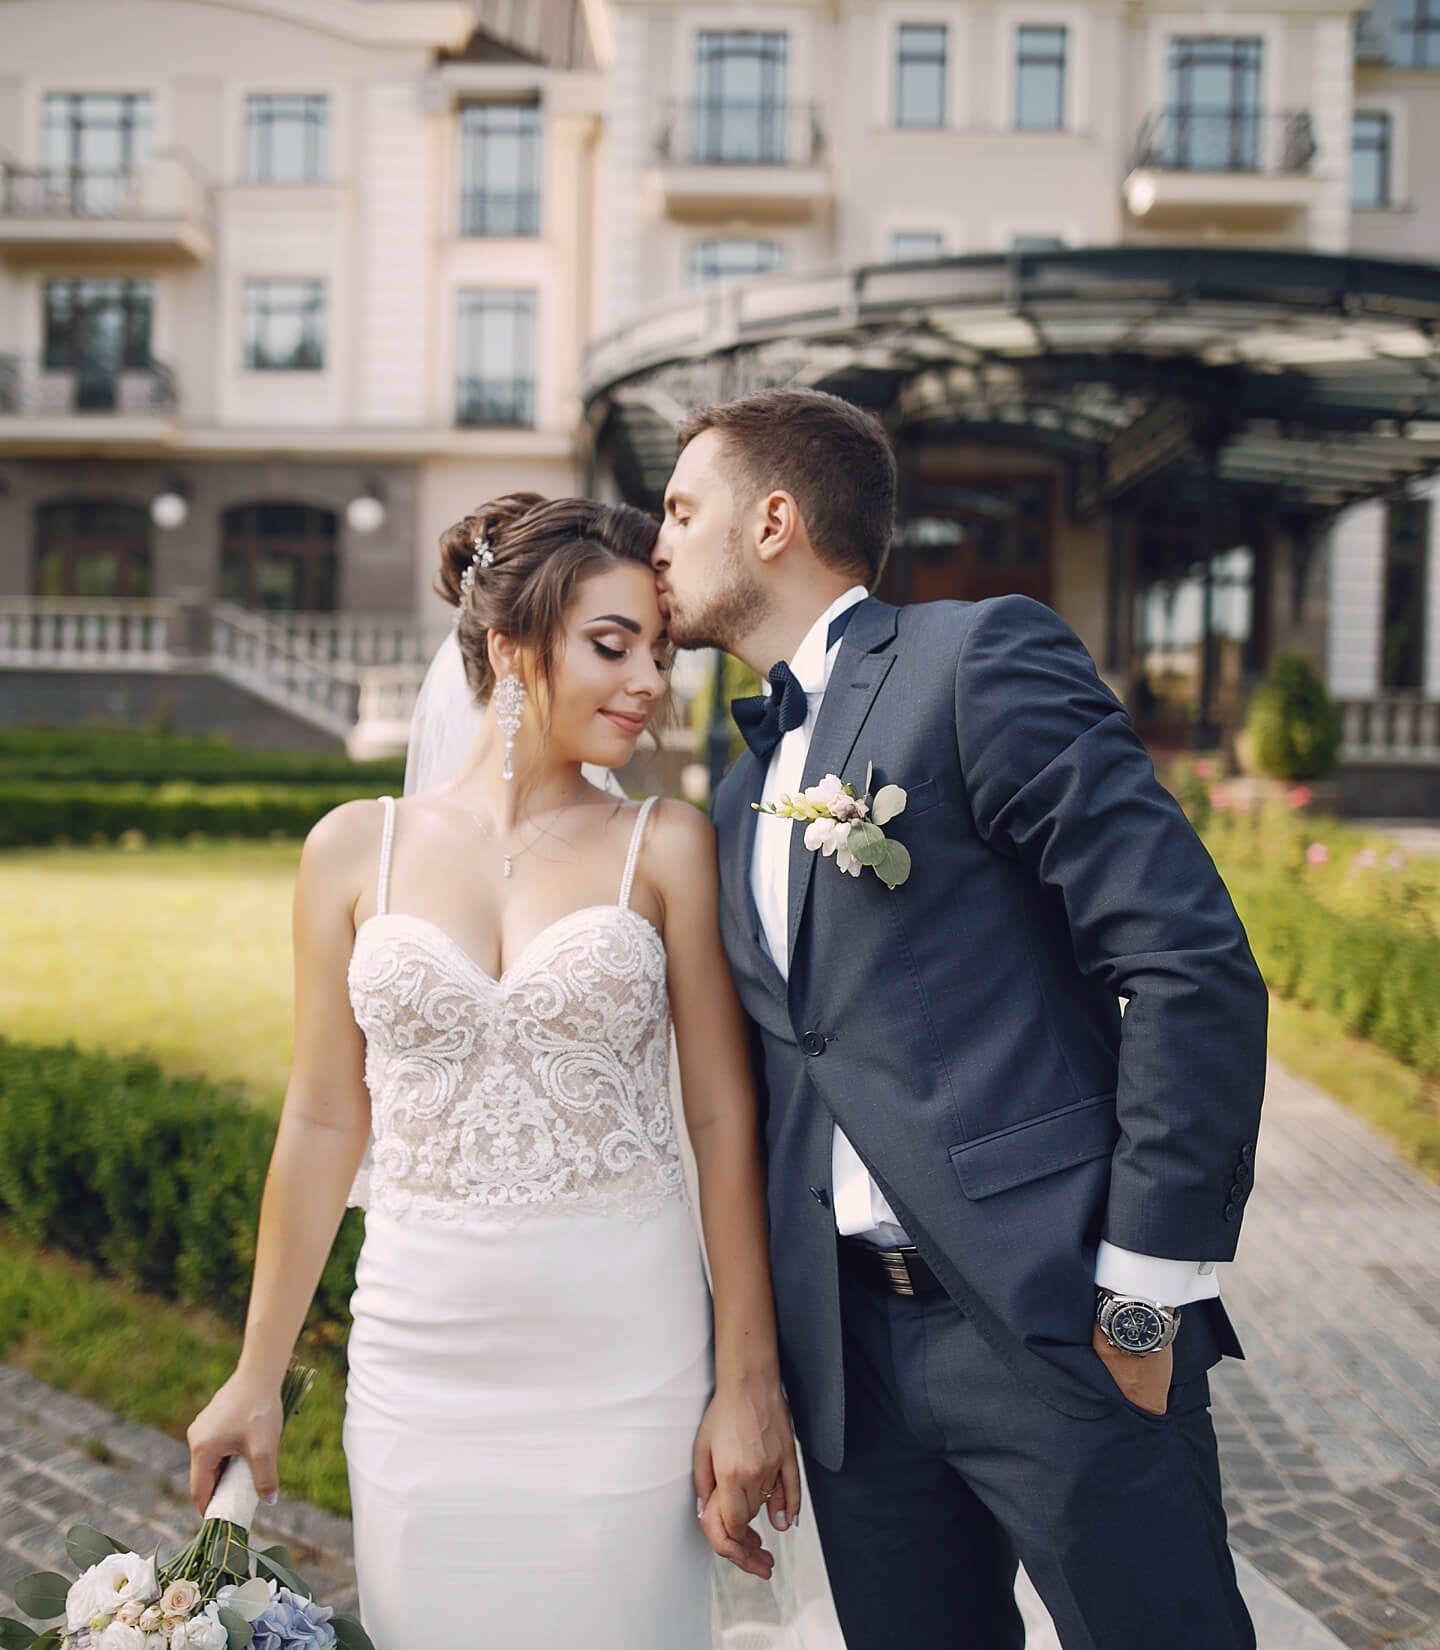 A married couple stand outside their wedding venue and pose for portraits.